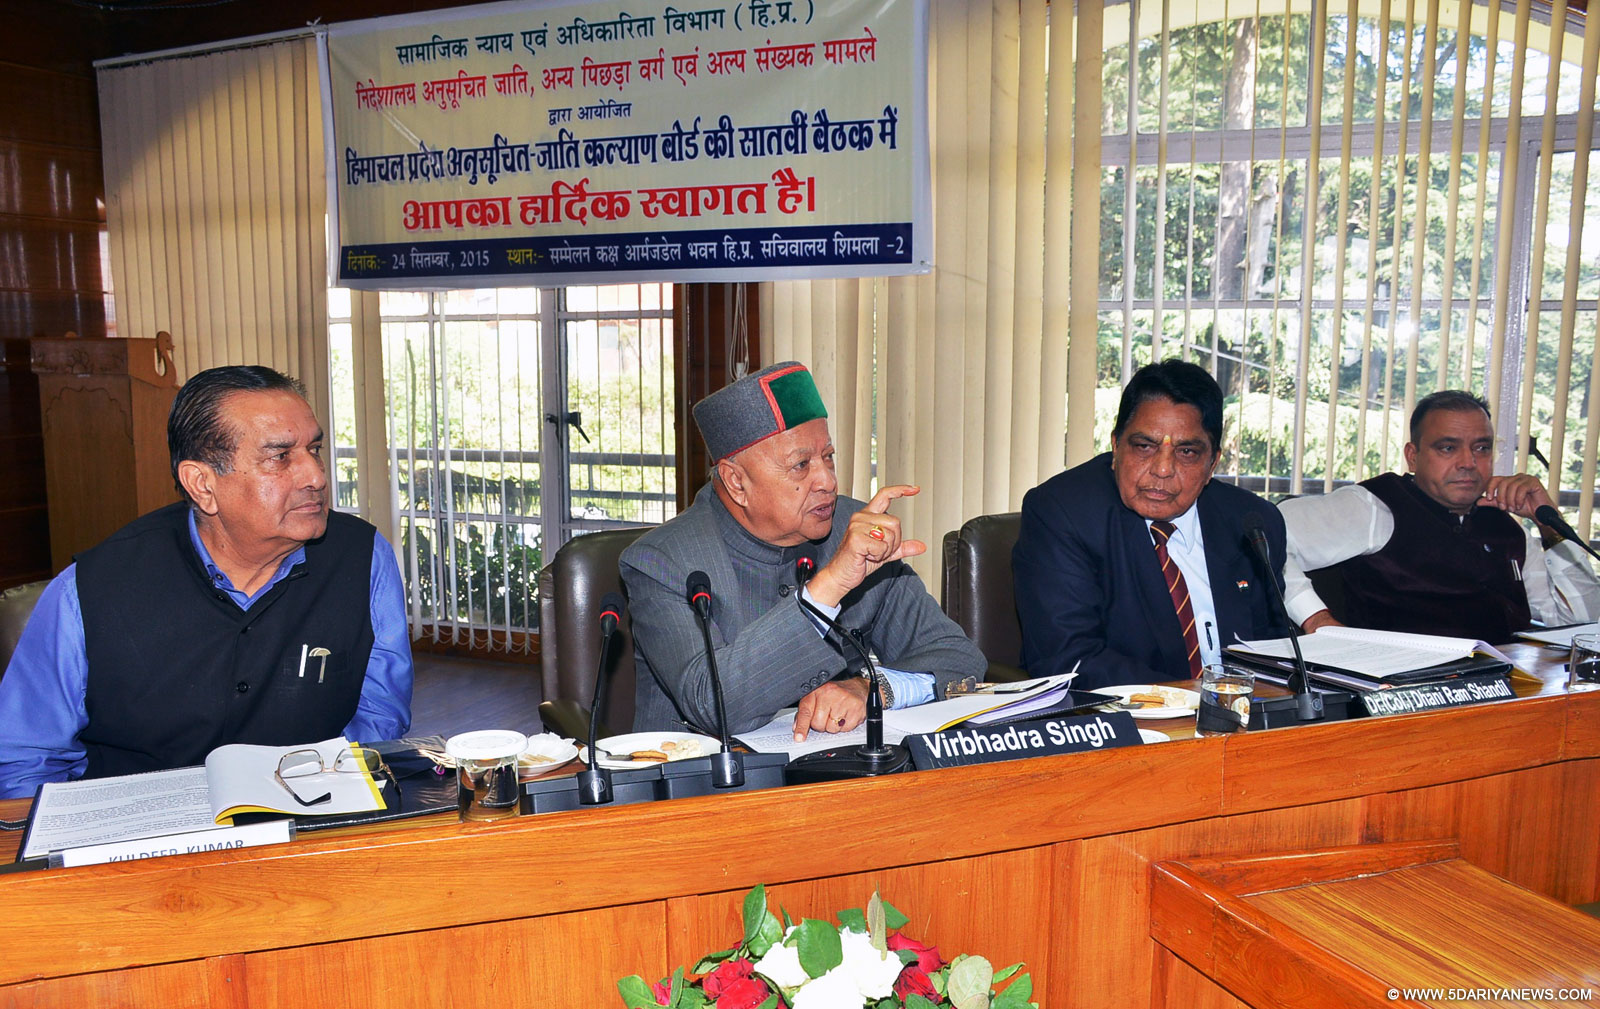 Chief Minister Shri Virbhadra Singh presiding over the meeting of Scheduled Caste Welfare Board at Shimla on 24 September 2015